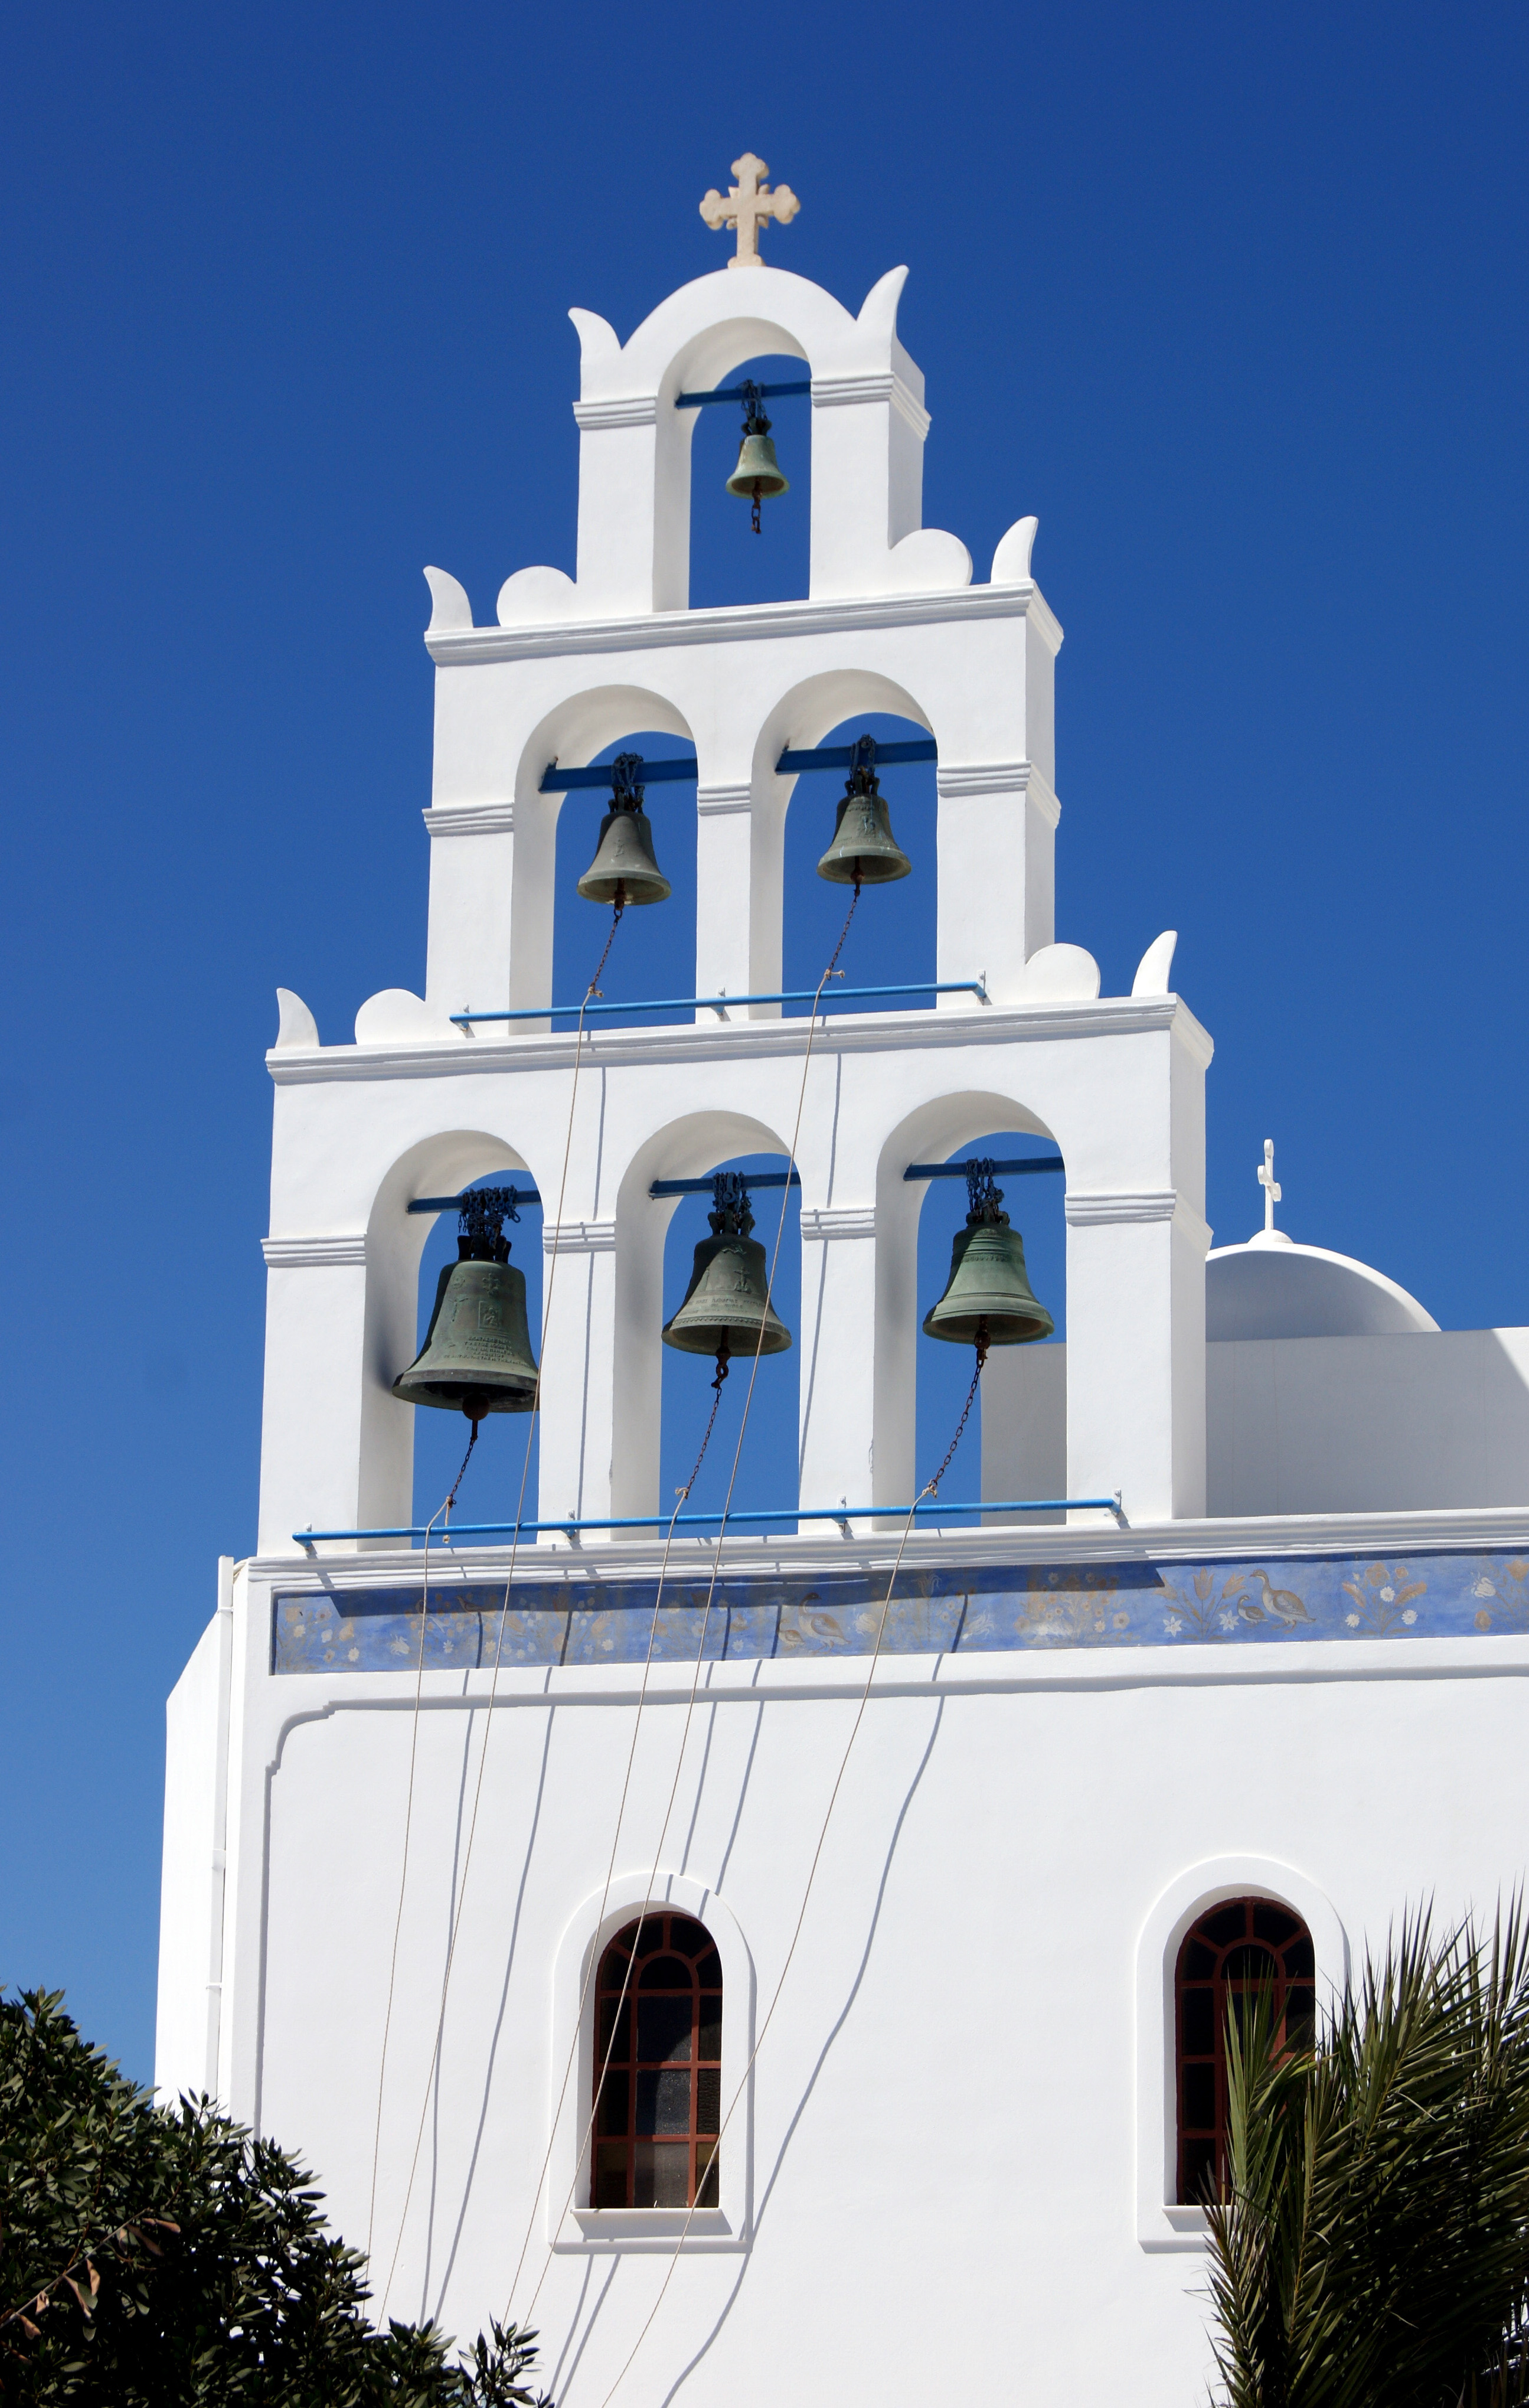 Santorini bell towers | Enthusiastical